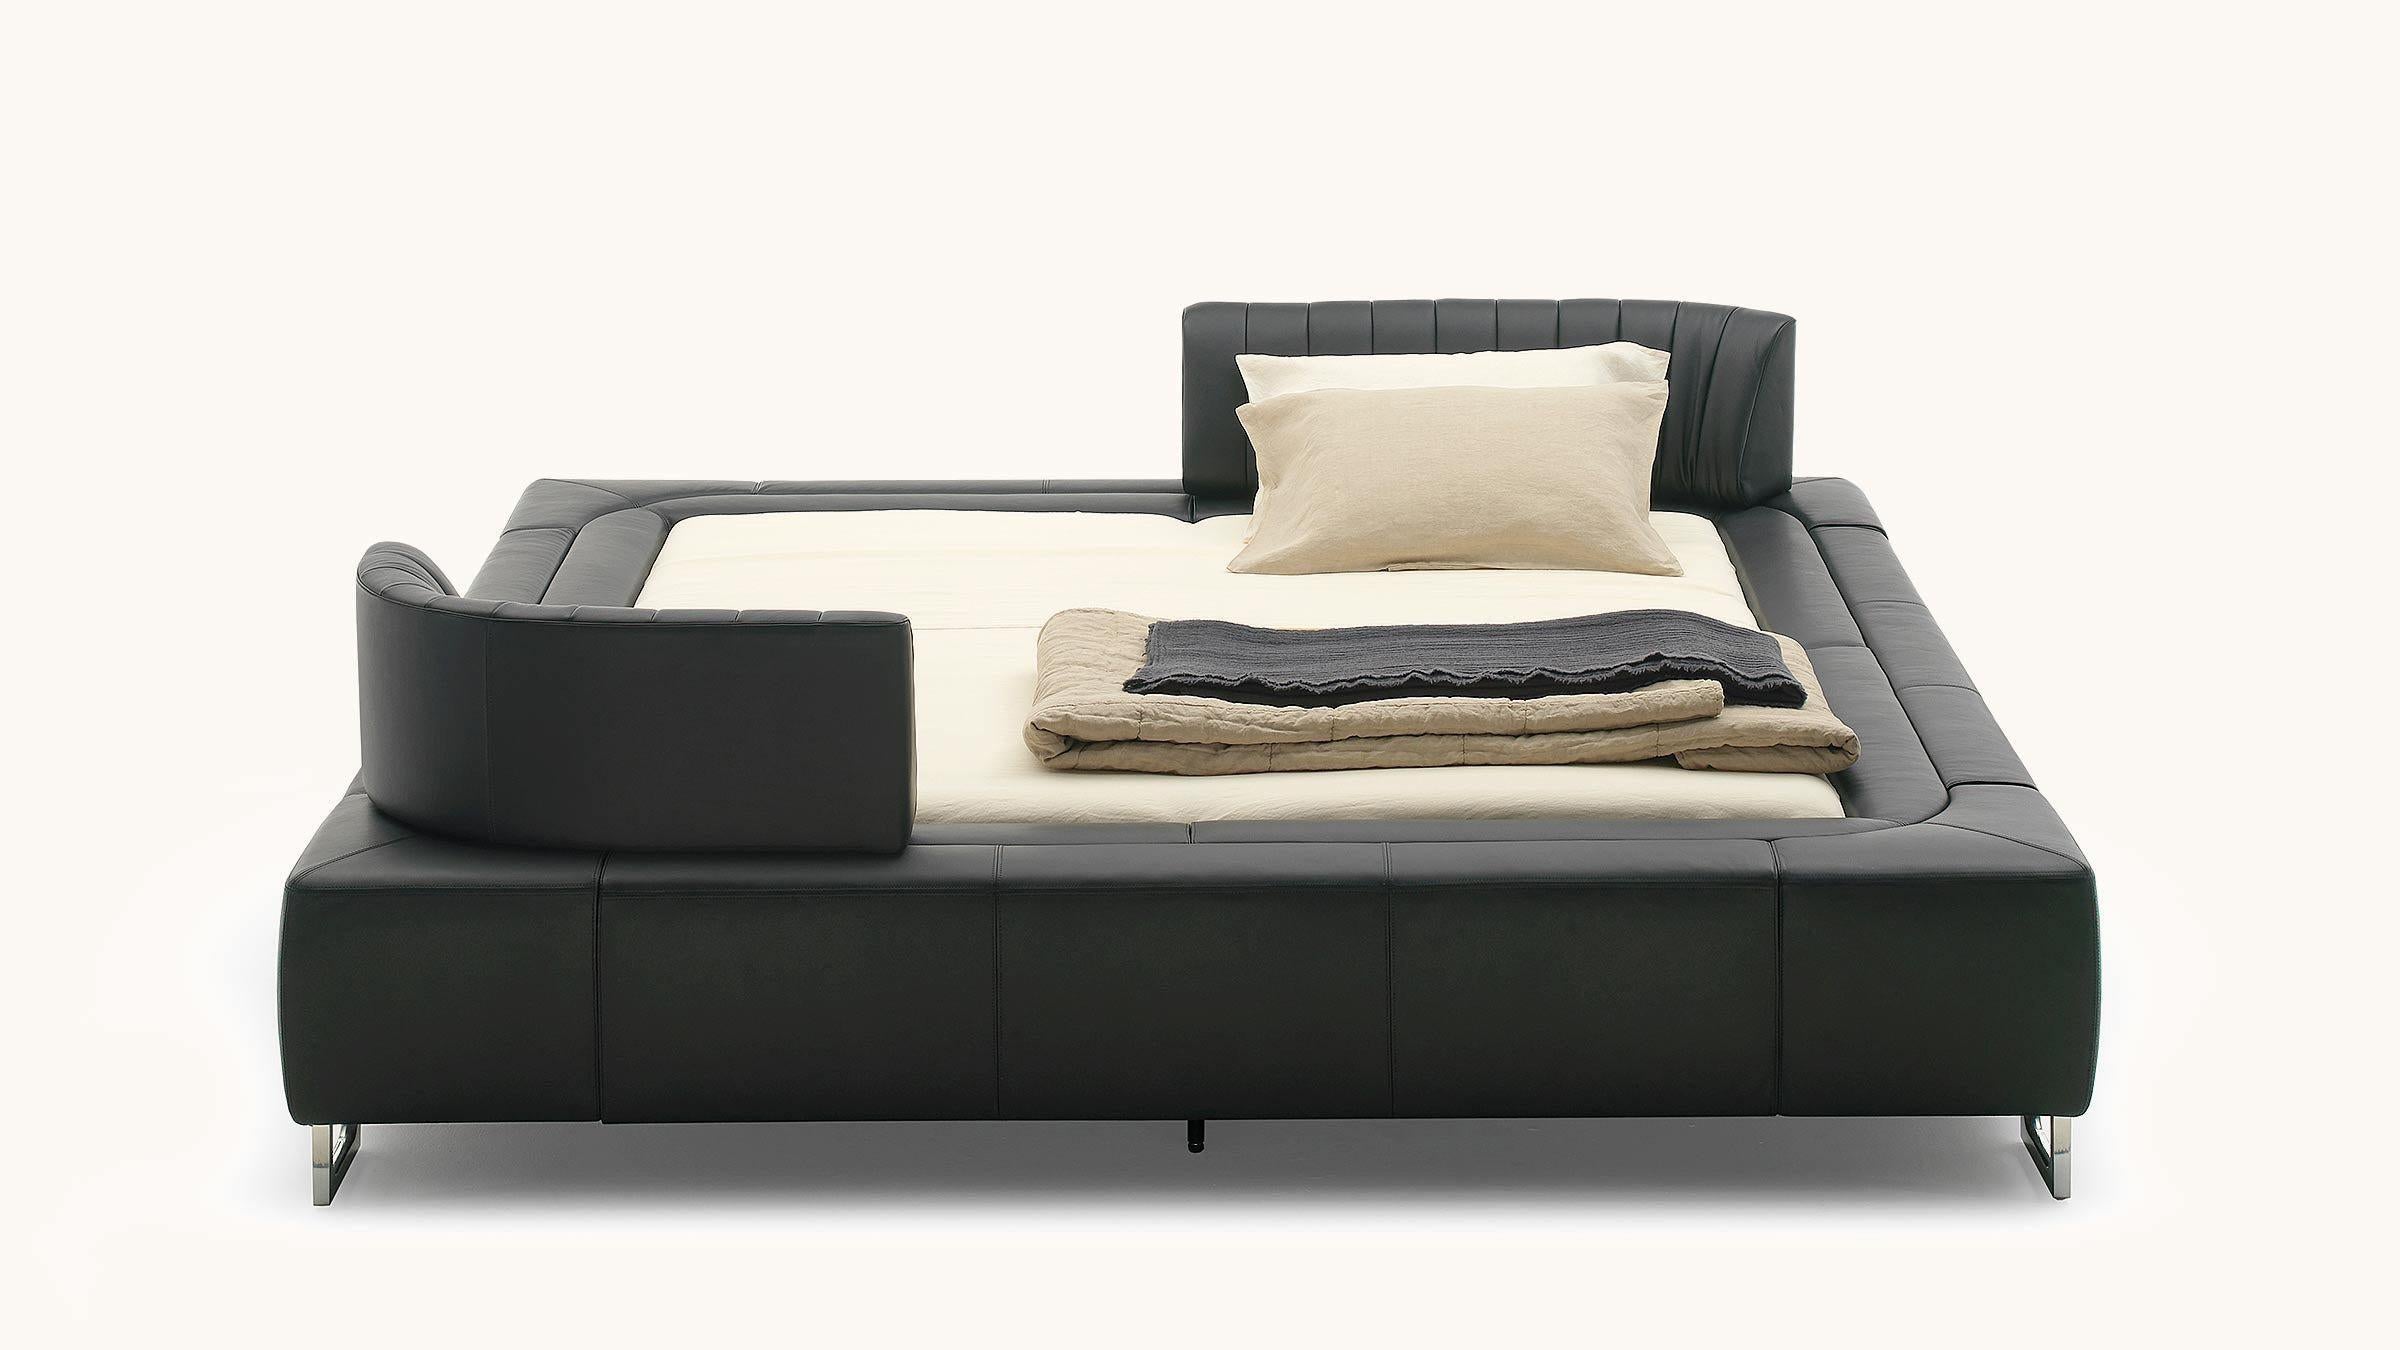 Swiss Desede DS-1165 King Size Bed in Leather by Hugo De Ruiter For Sale